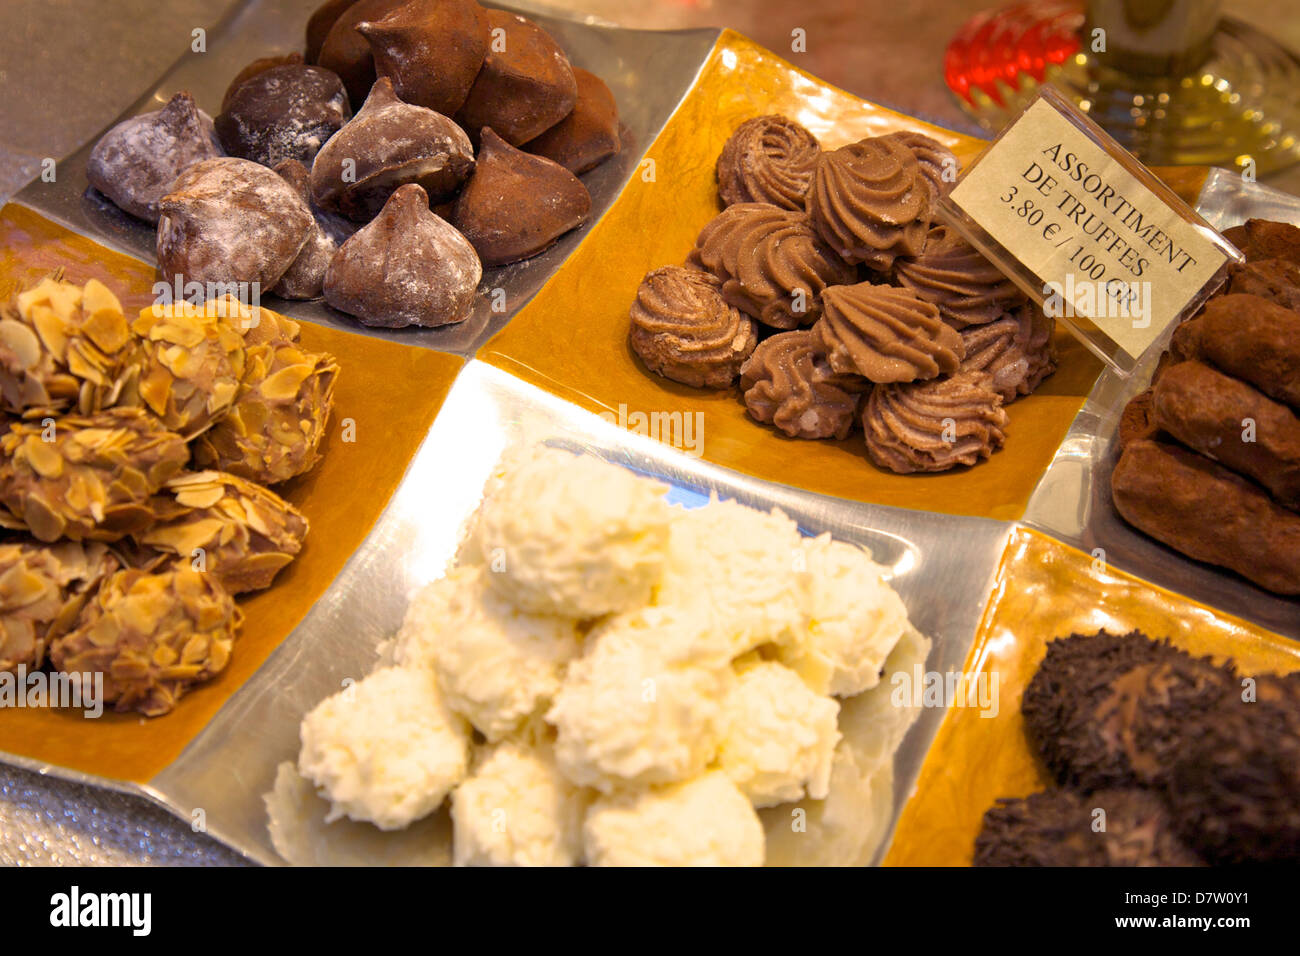 Chocolate truffles in a sweet shop, Brussels, Belgium Stock Photo